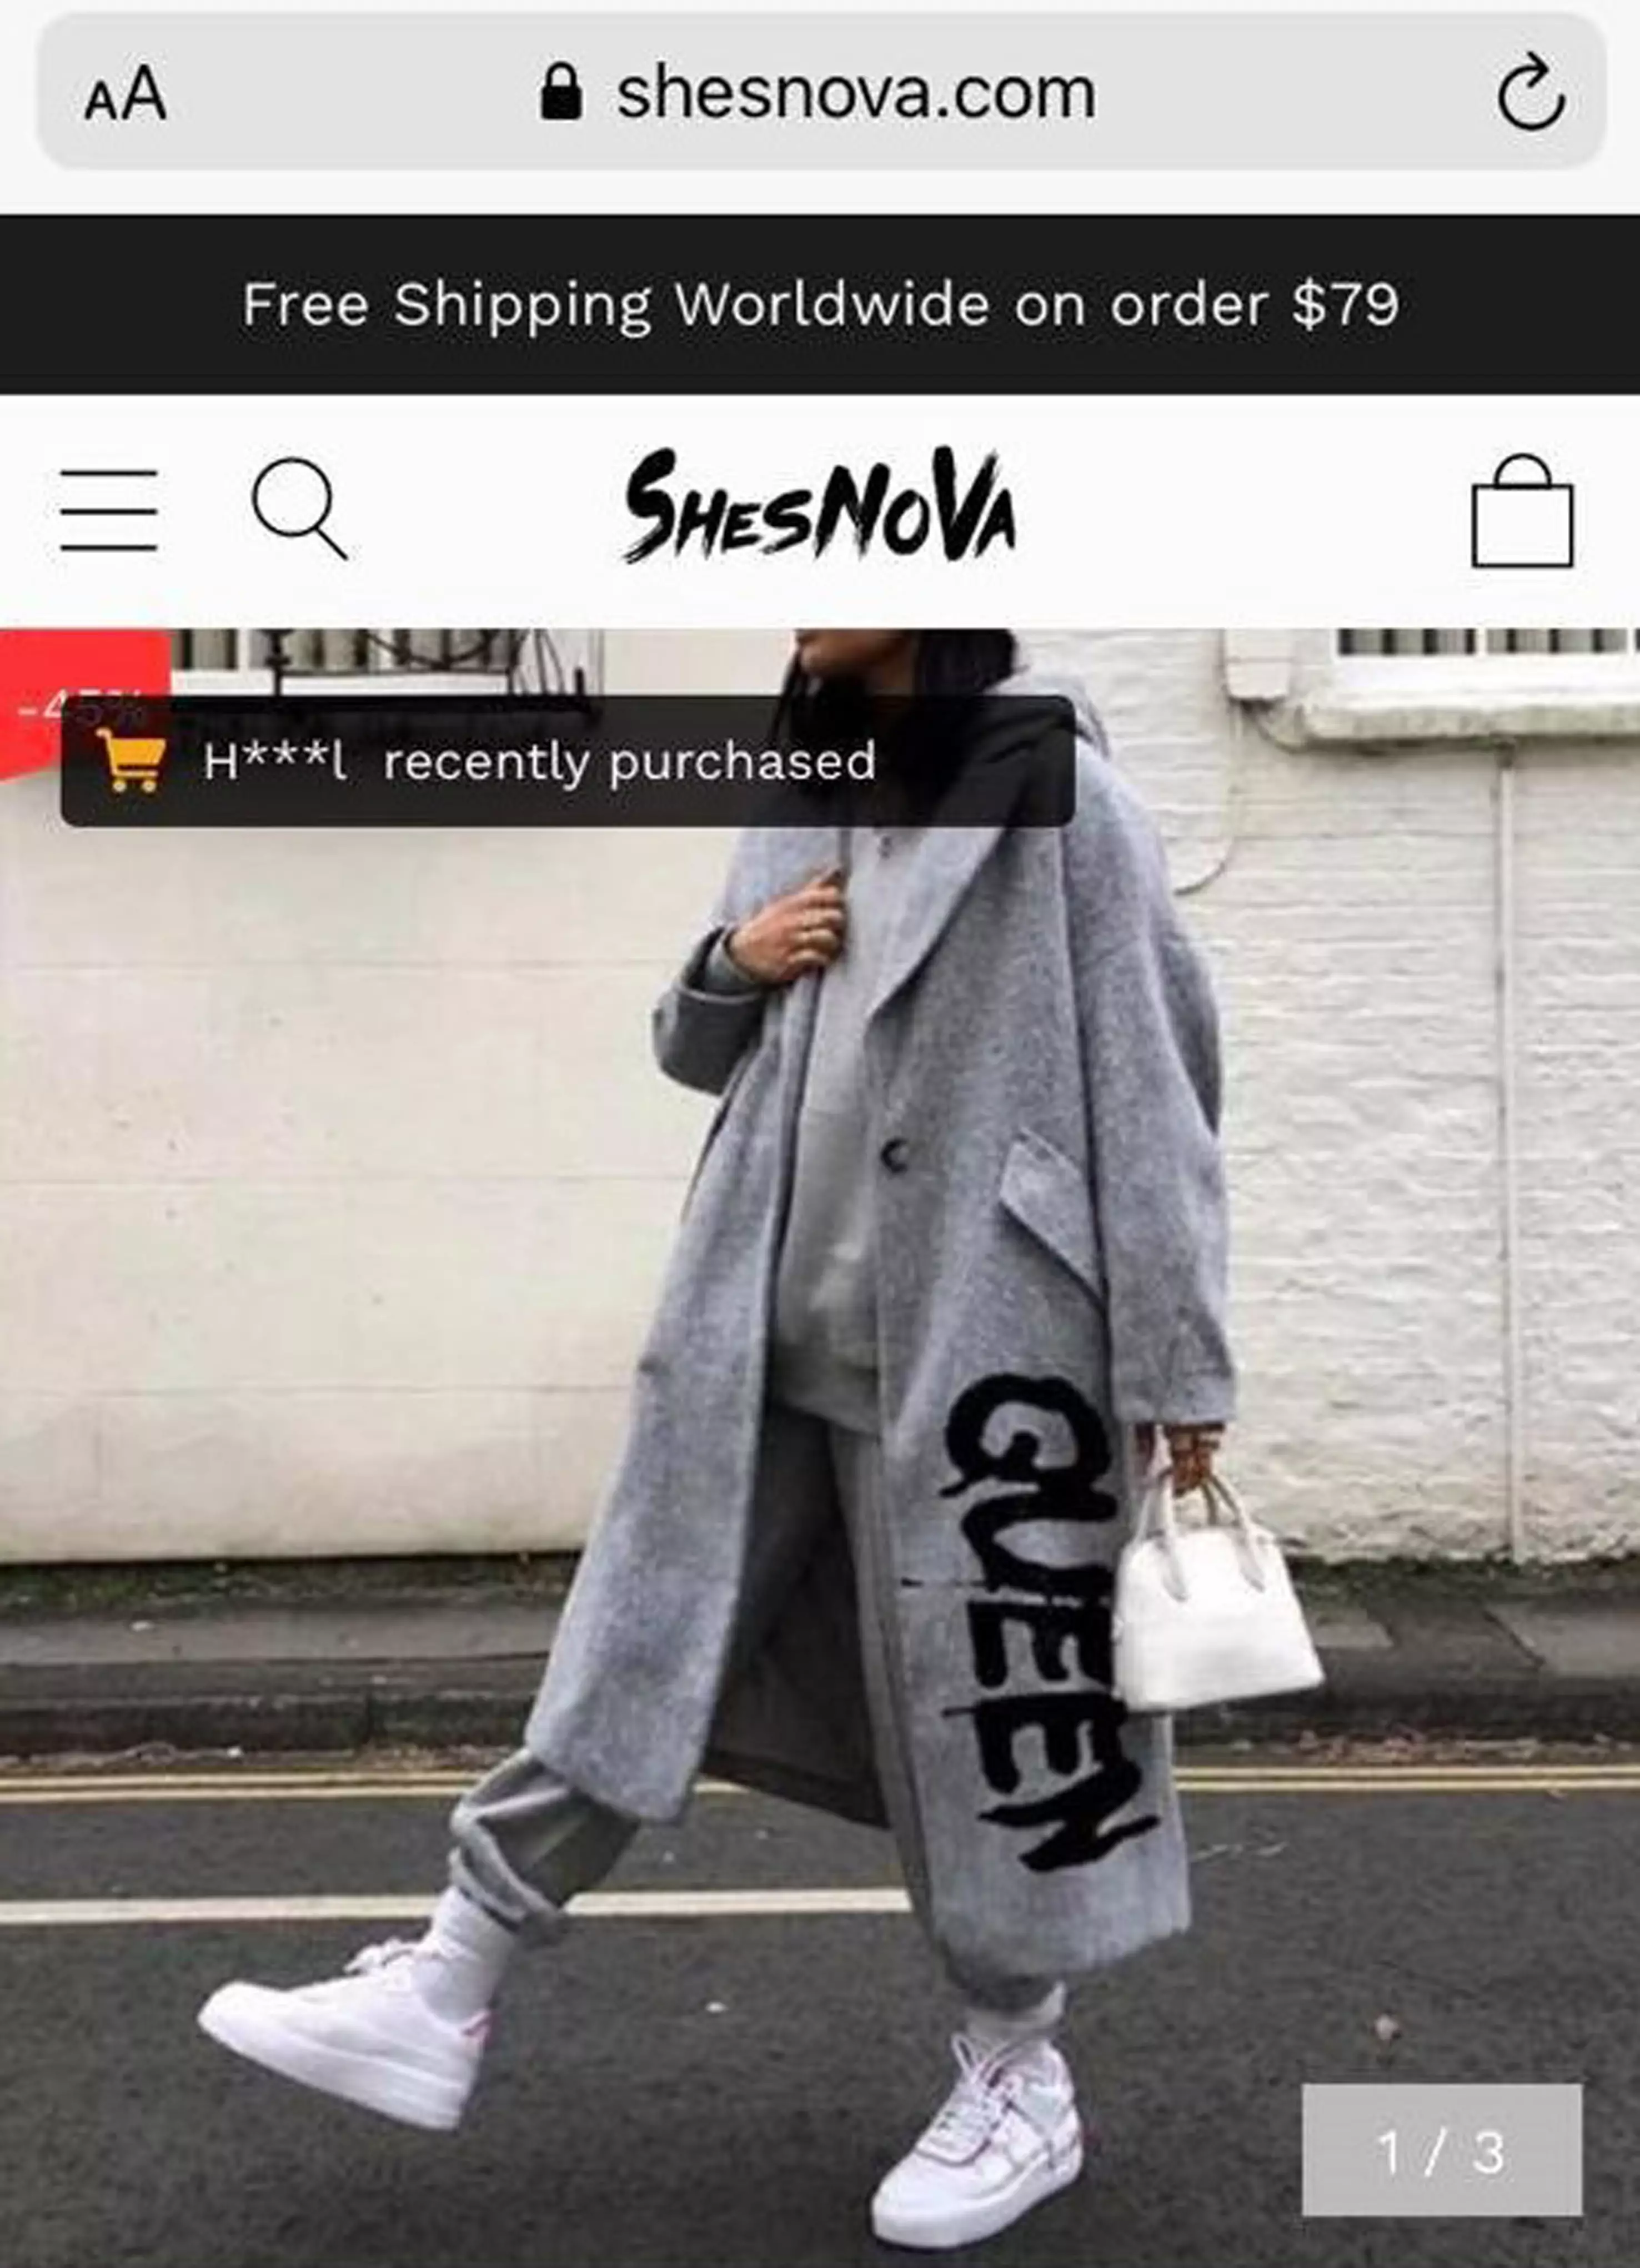 Chellce was expecting a grey coat with the word 'Queen' (